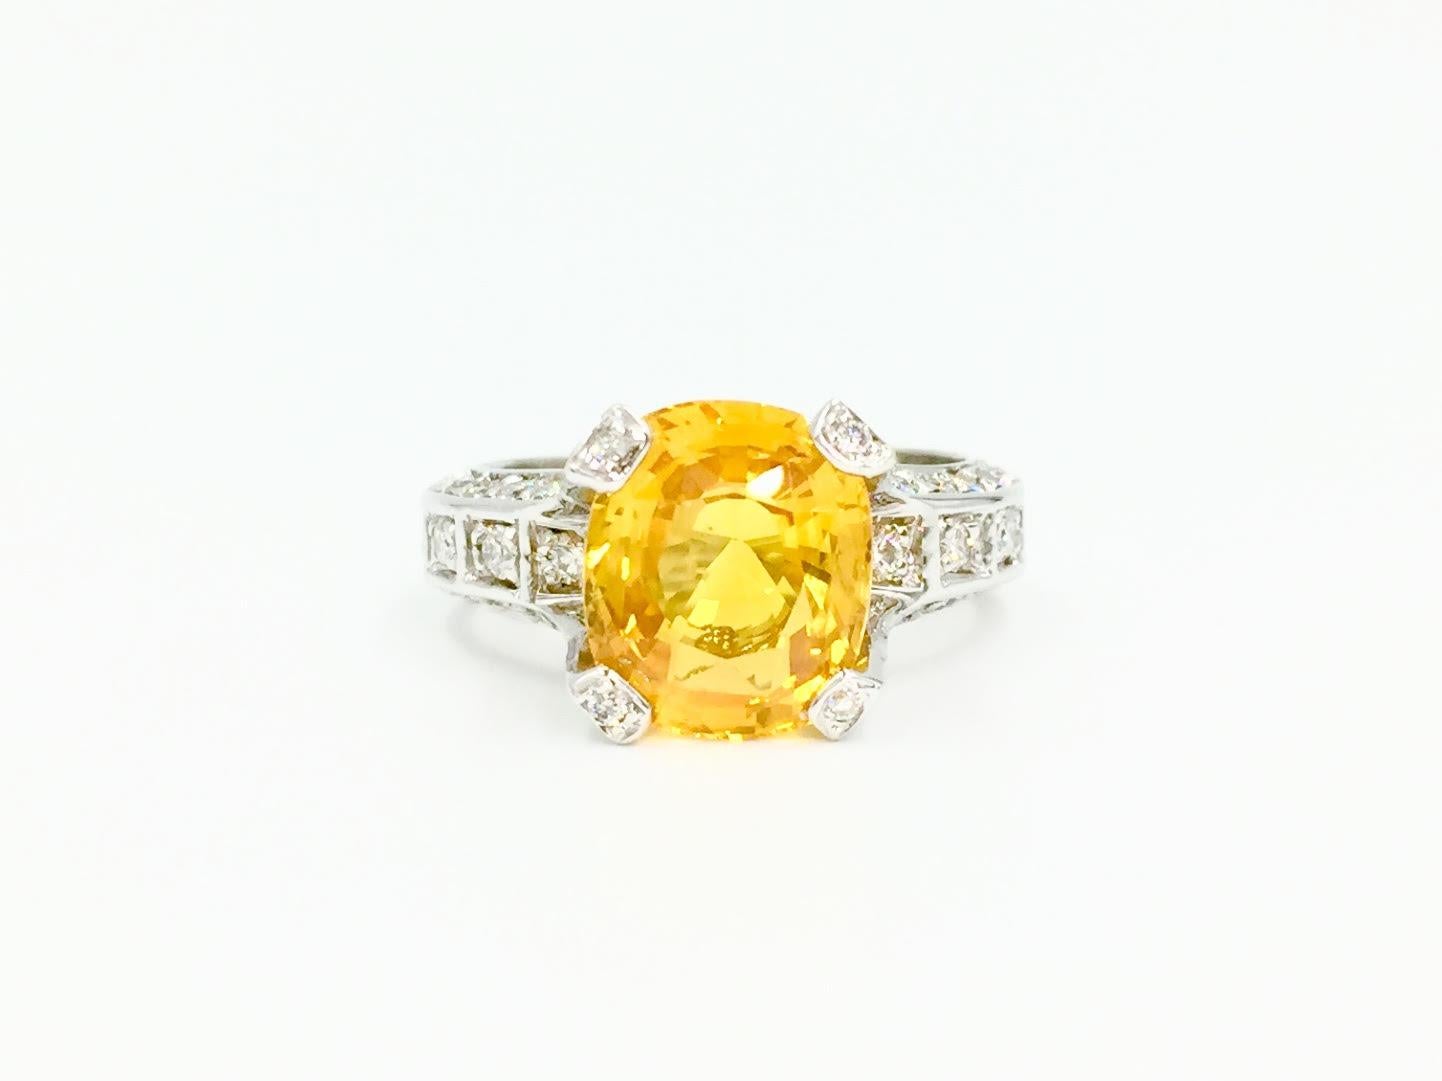 Beautiful vivid medium tone five carat cushion cut yellow sapphire is set perfectly in this Leslie Greene 18 karat diamond mounting. Sapphire is very clean with few visible natural inclusions. White gold setting features 1.16 carats of diamonds,